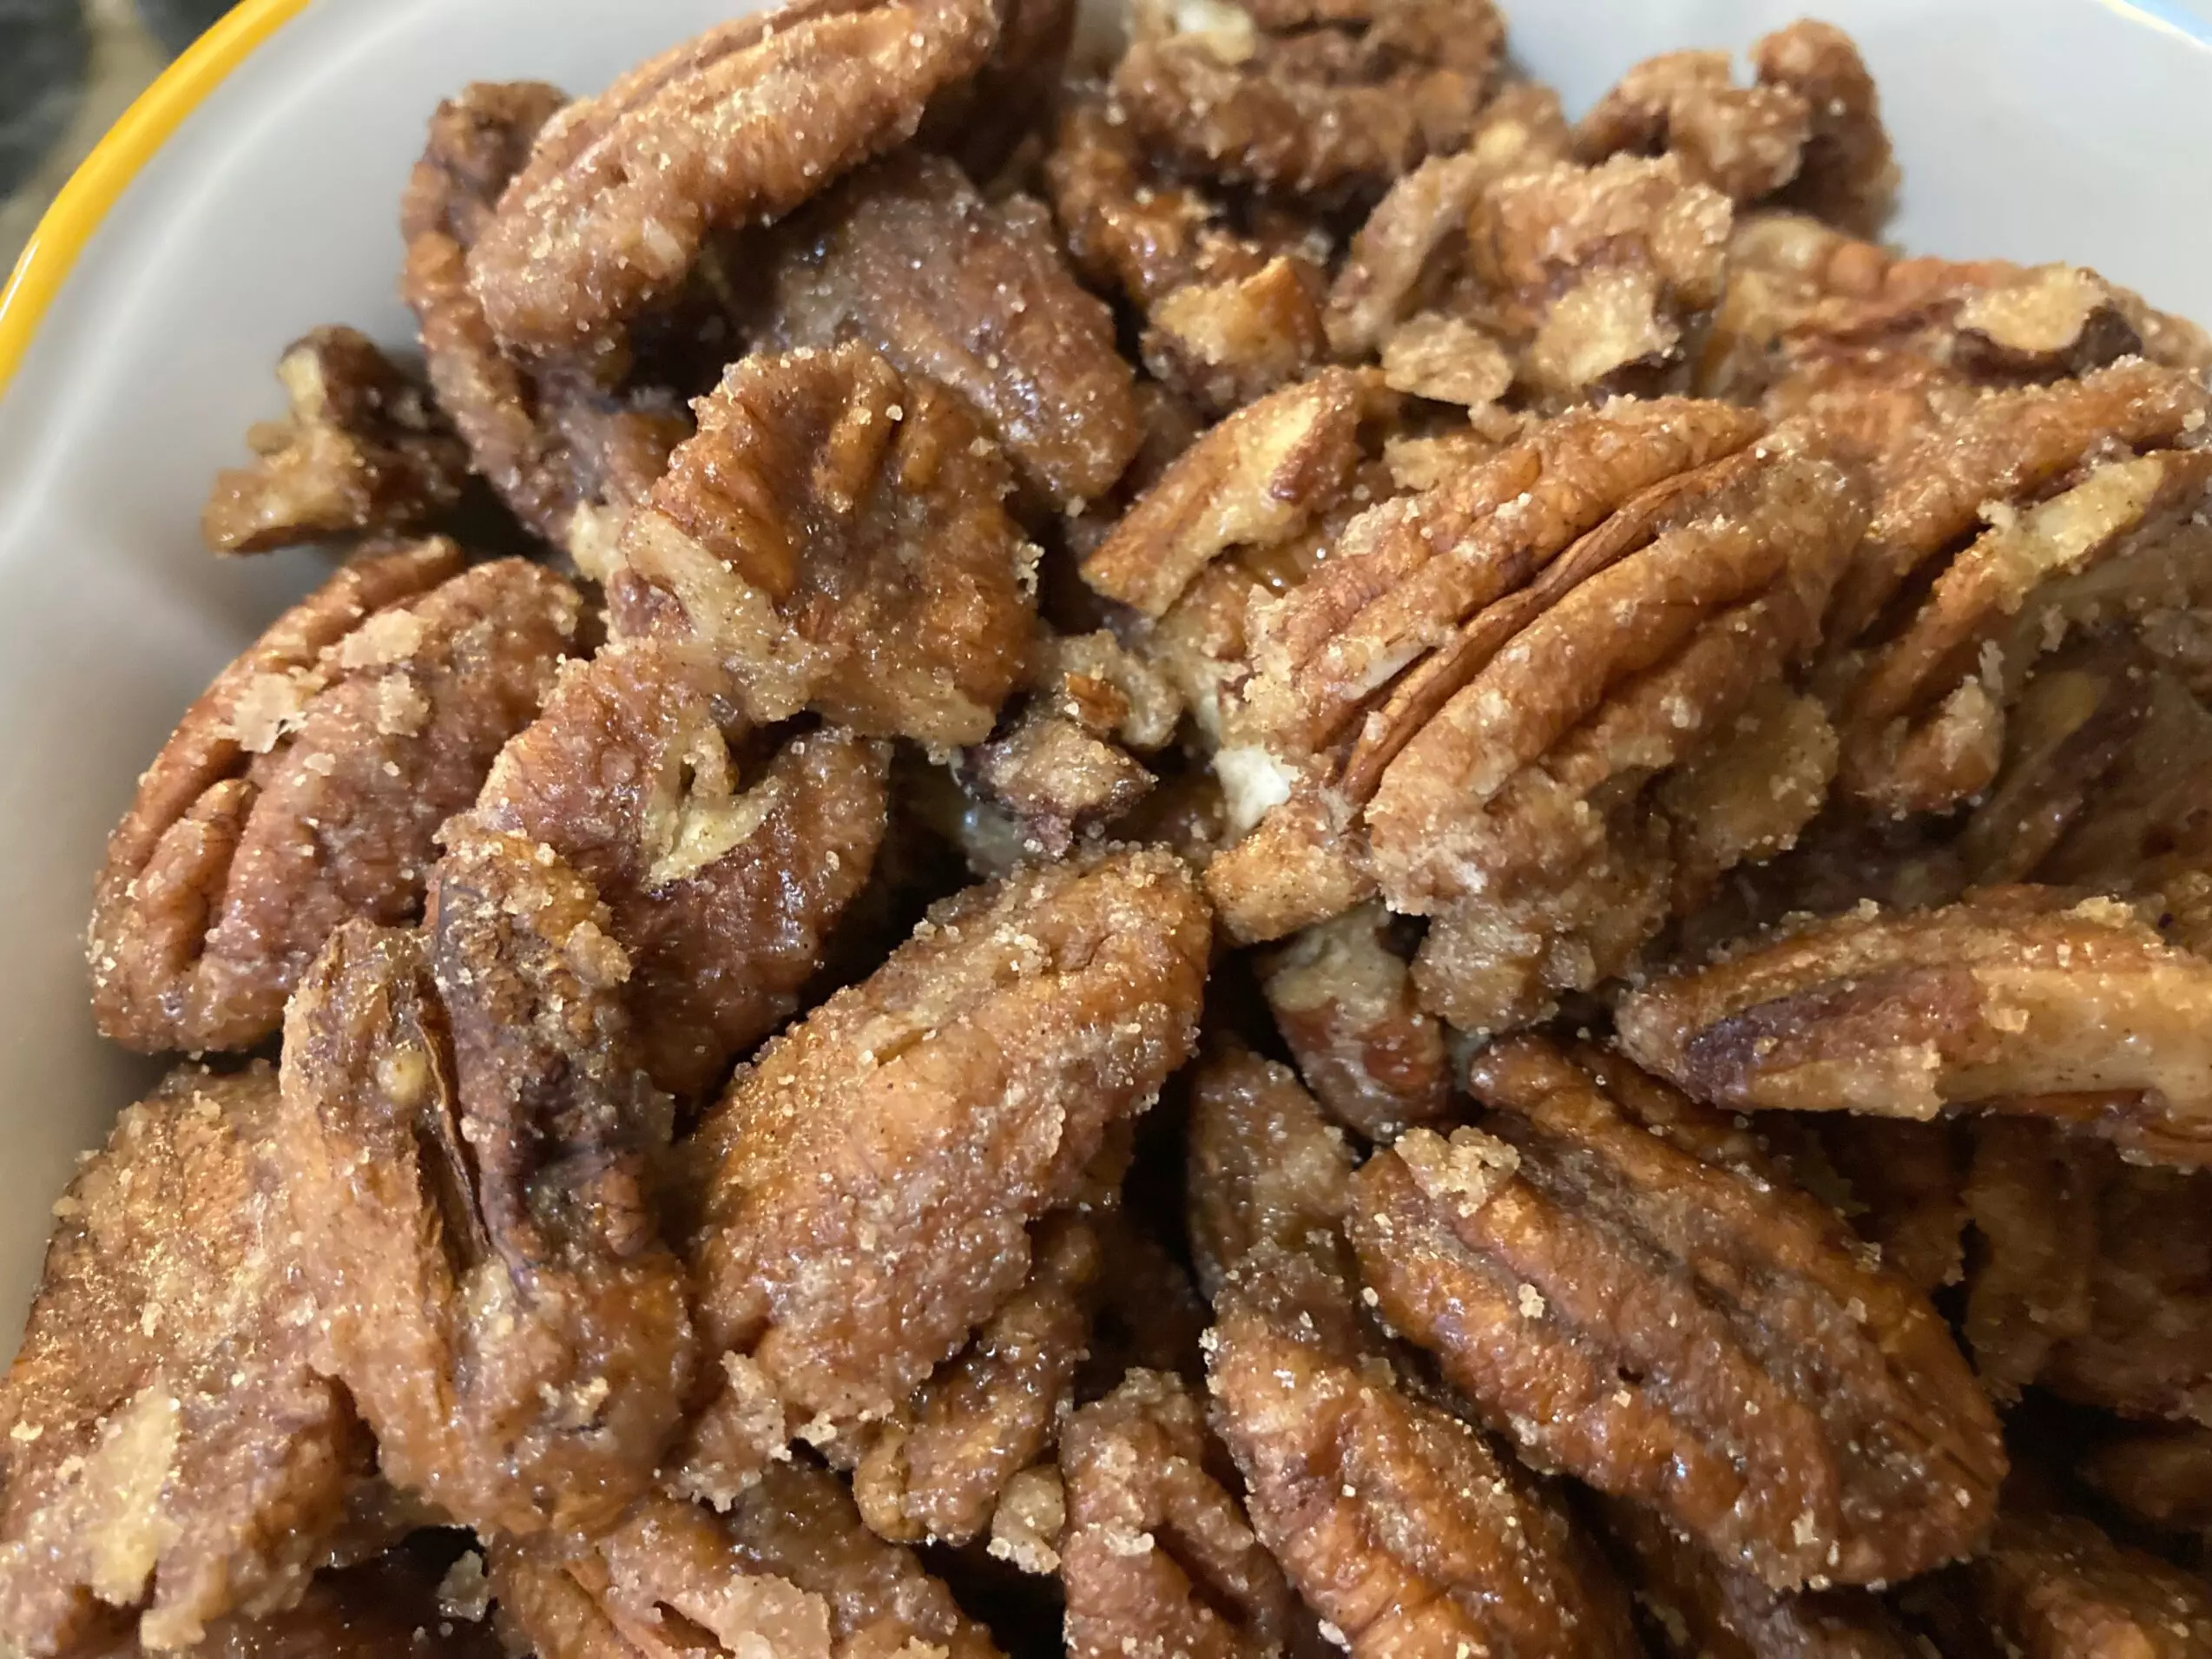 Candied pecans from Out of the Box Baking.com